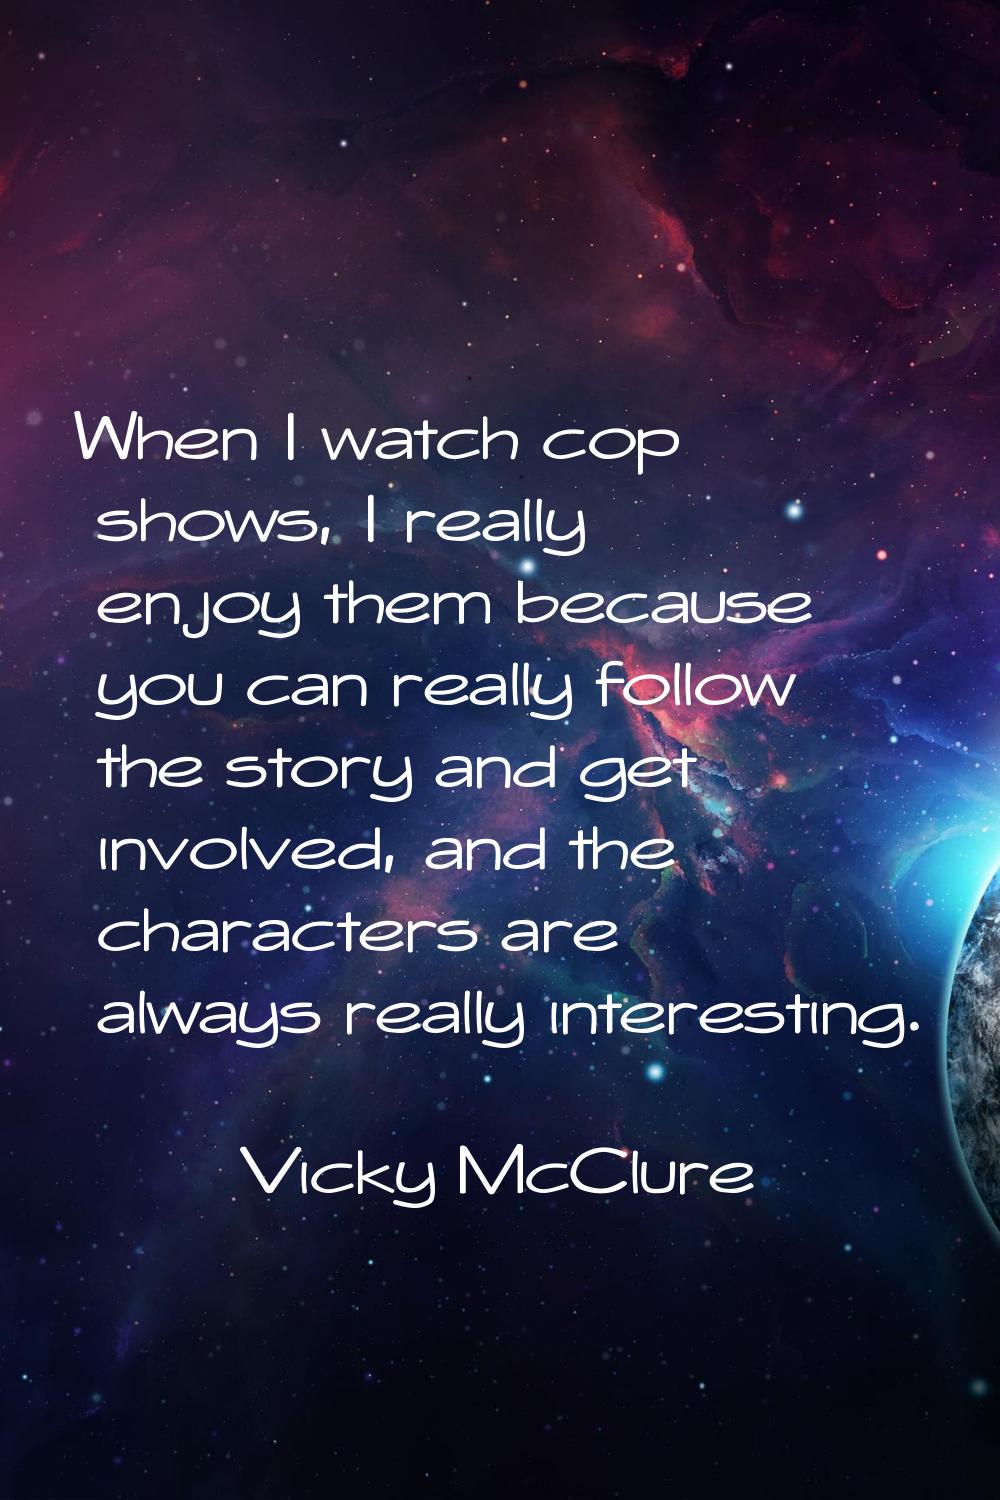 When I watch cop shows, I really enjoy them because you can really follow the story and get involve